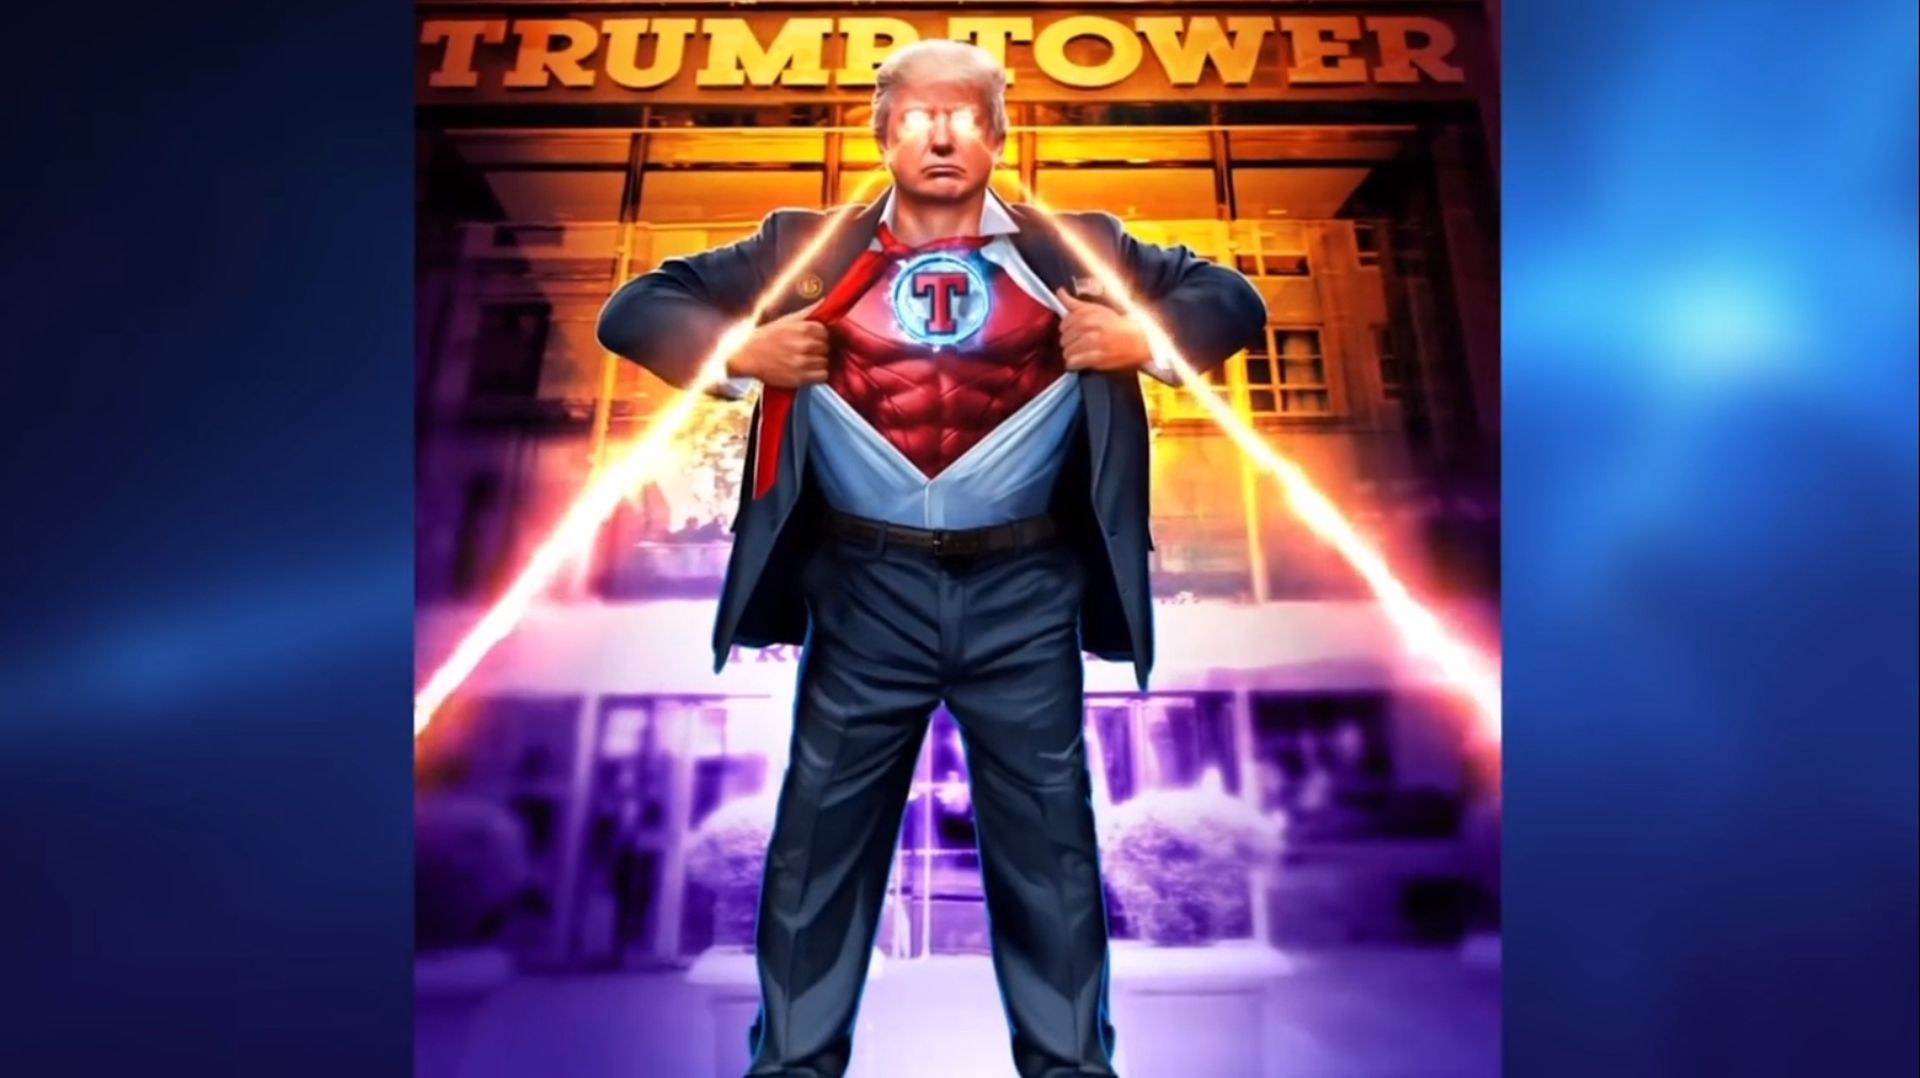 Former US President launched a collection of 45,000 fantasy Trump NFT trading cards on Thursday, which he announced via Truth Social, the social media...